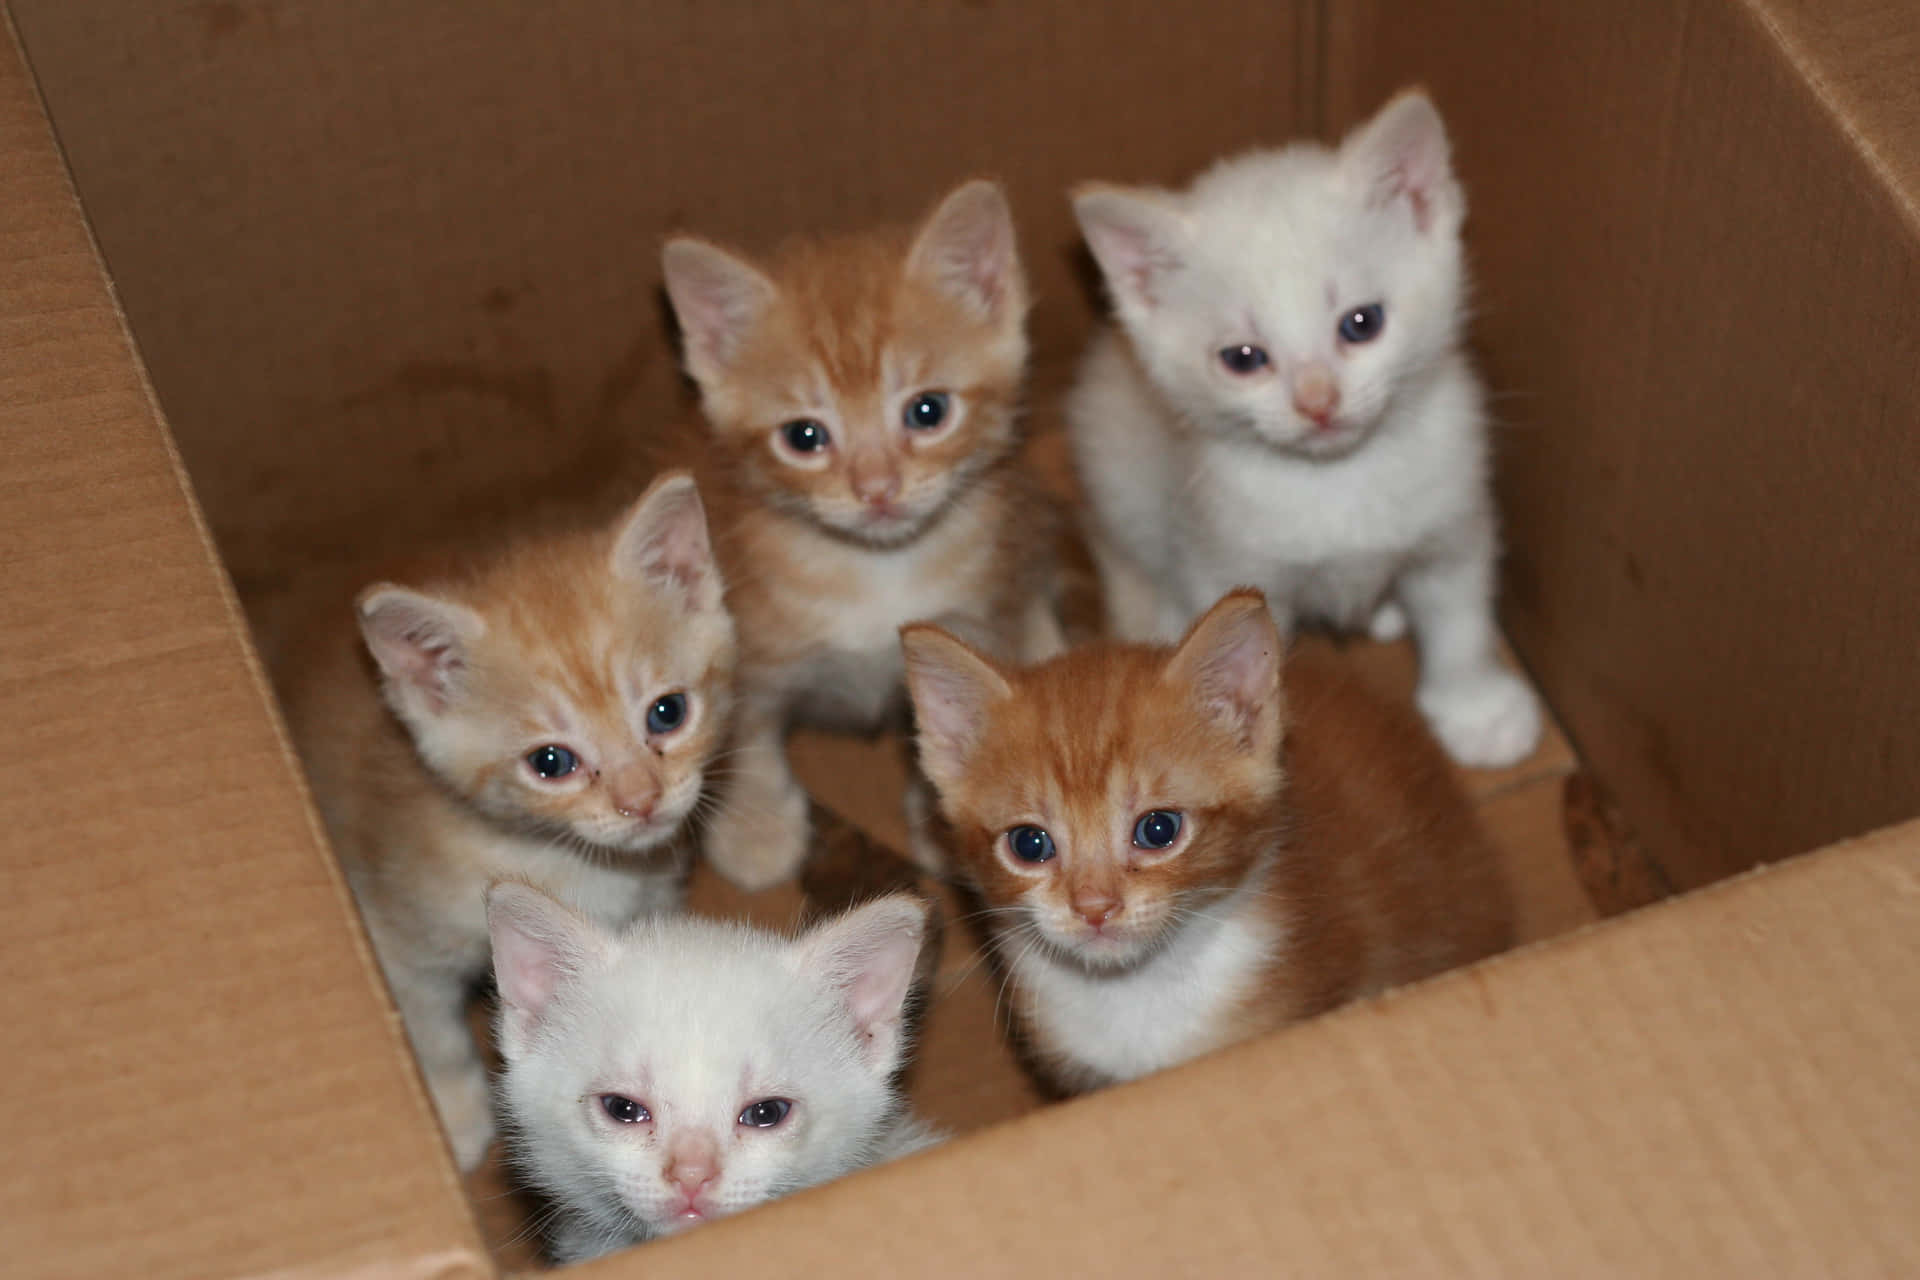 A Cardboard Box With Kittens Inside